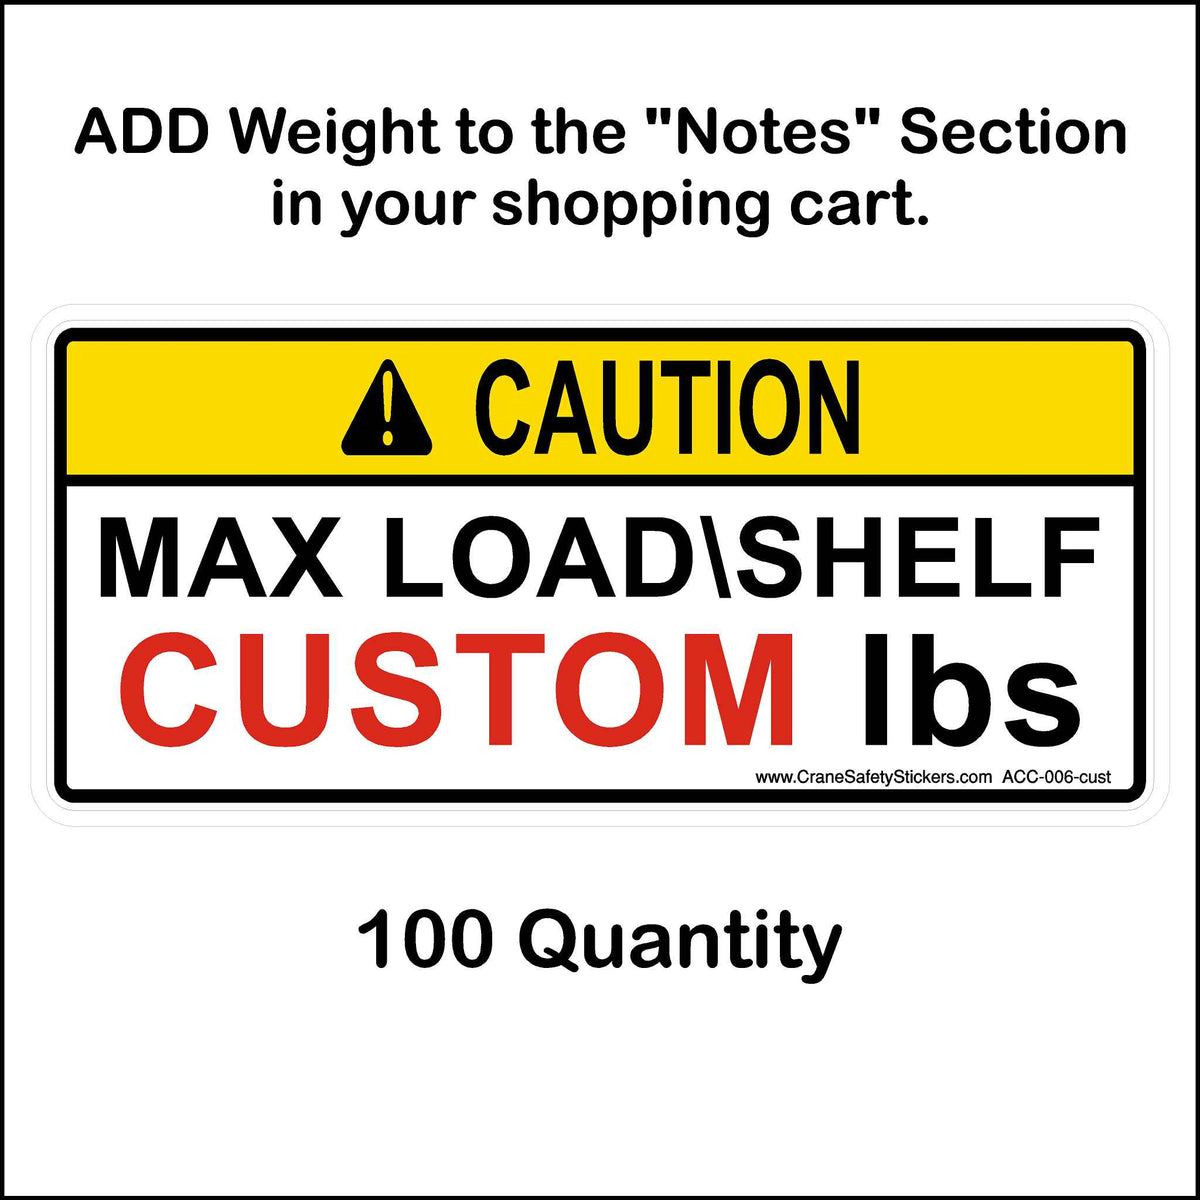 Custom Small Pallet Racking Sticker Printed with Caution Max Load Shelf. 100 Quantity.